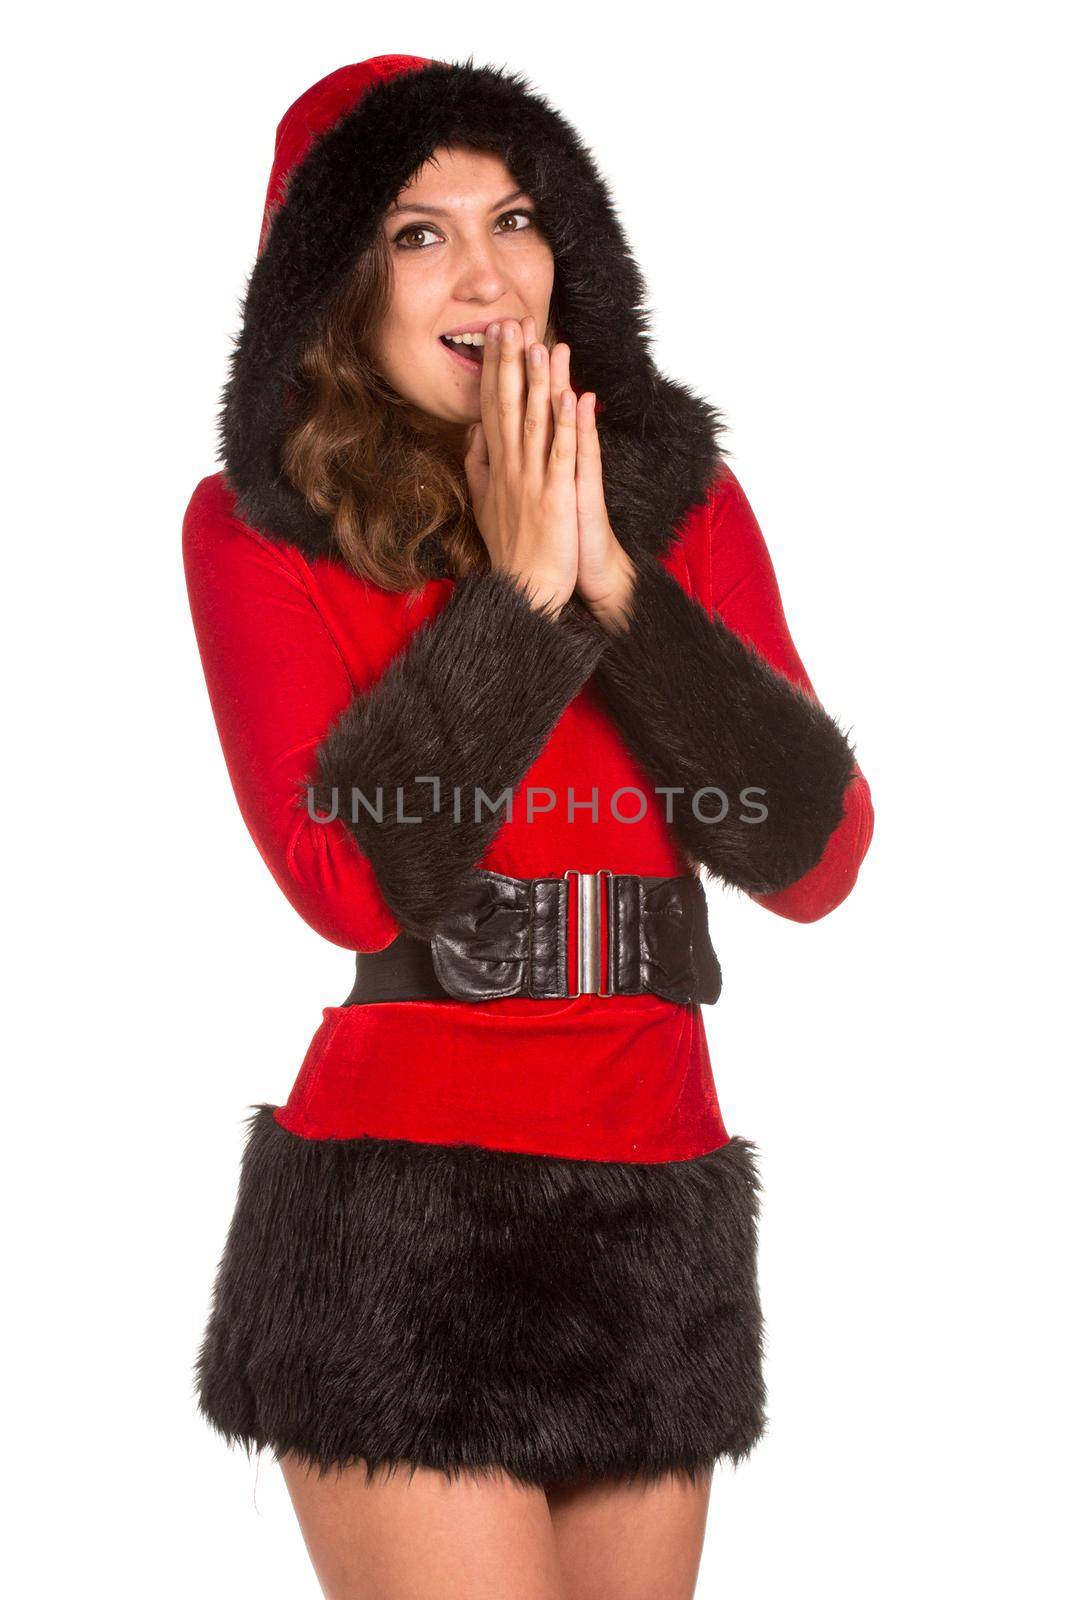 Emotional surprised young woman dressed with Christmas costume, isolated over white